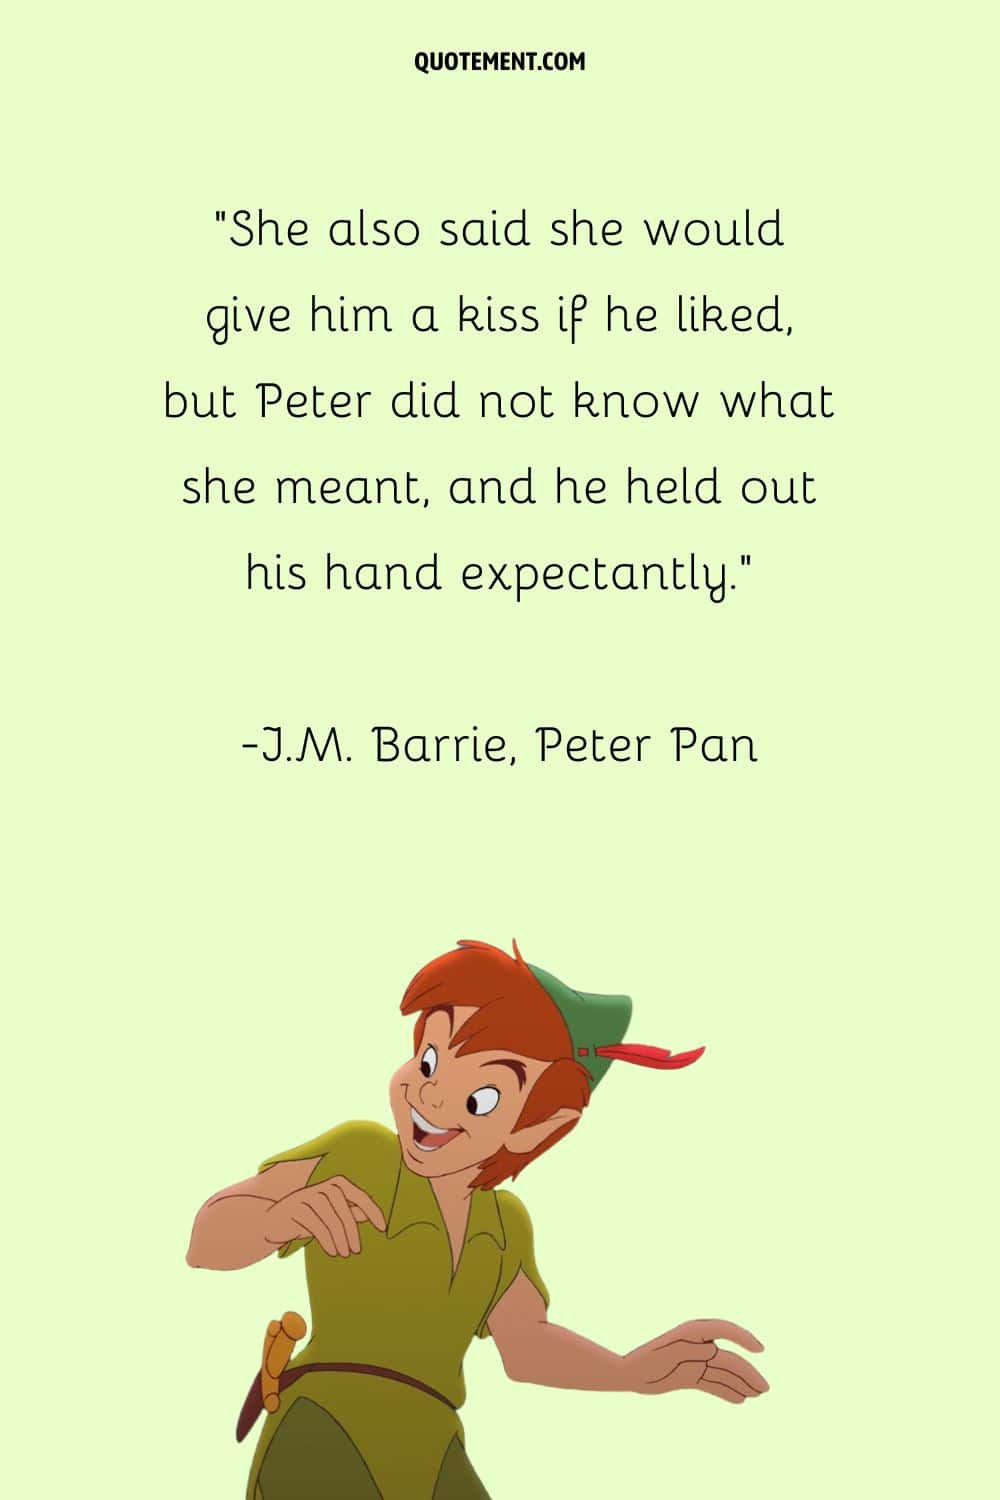 “She also said she would give him a kiss if he liked, but Peter did not know what she meant, and he held out his hand expectantly.” ― J.M. Barrie, Peter Pan